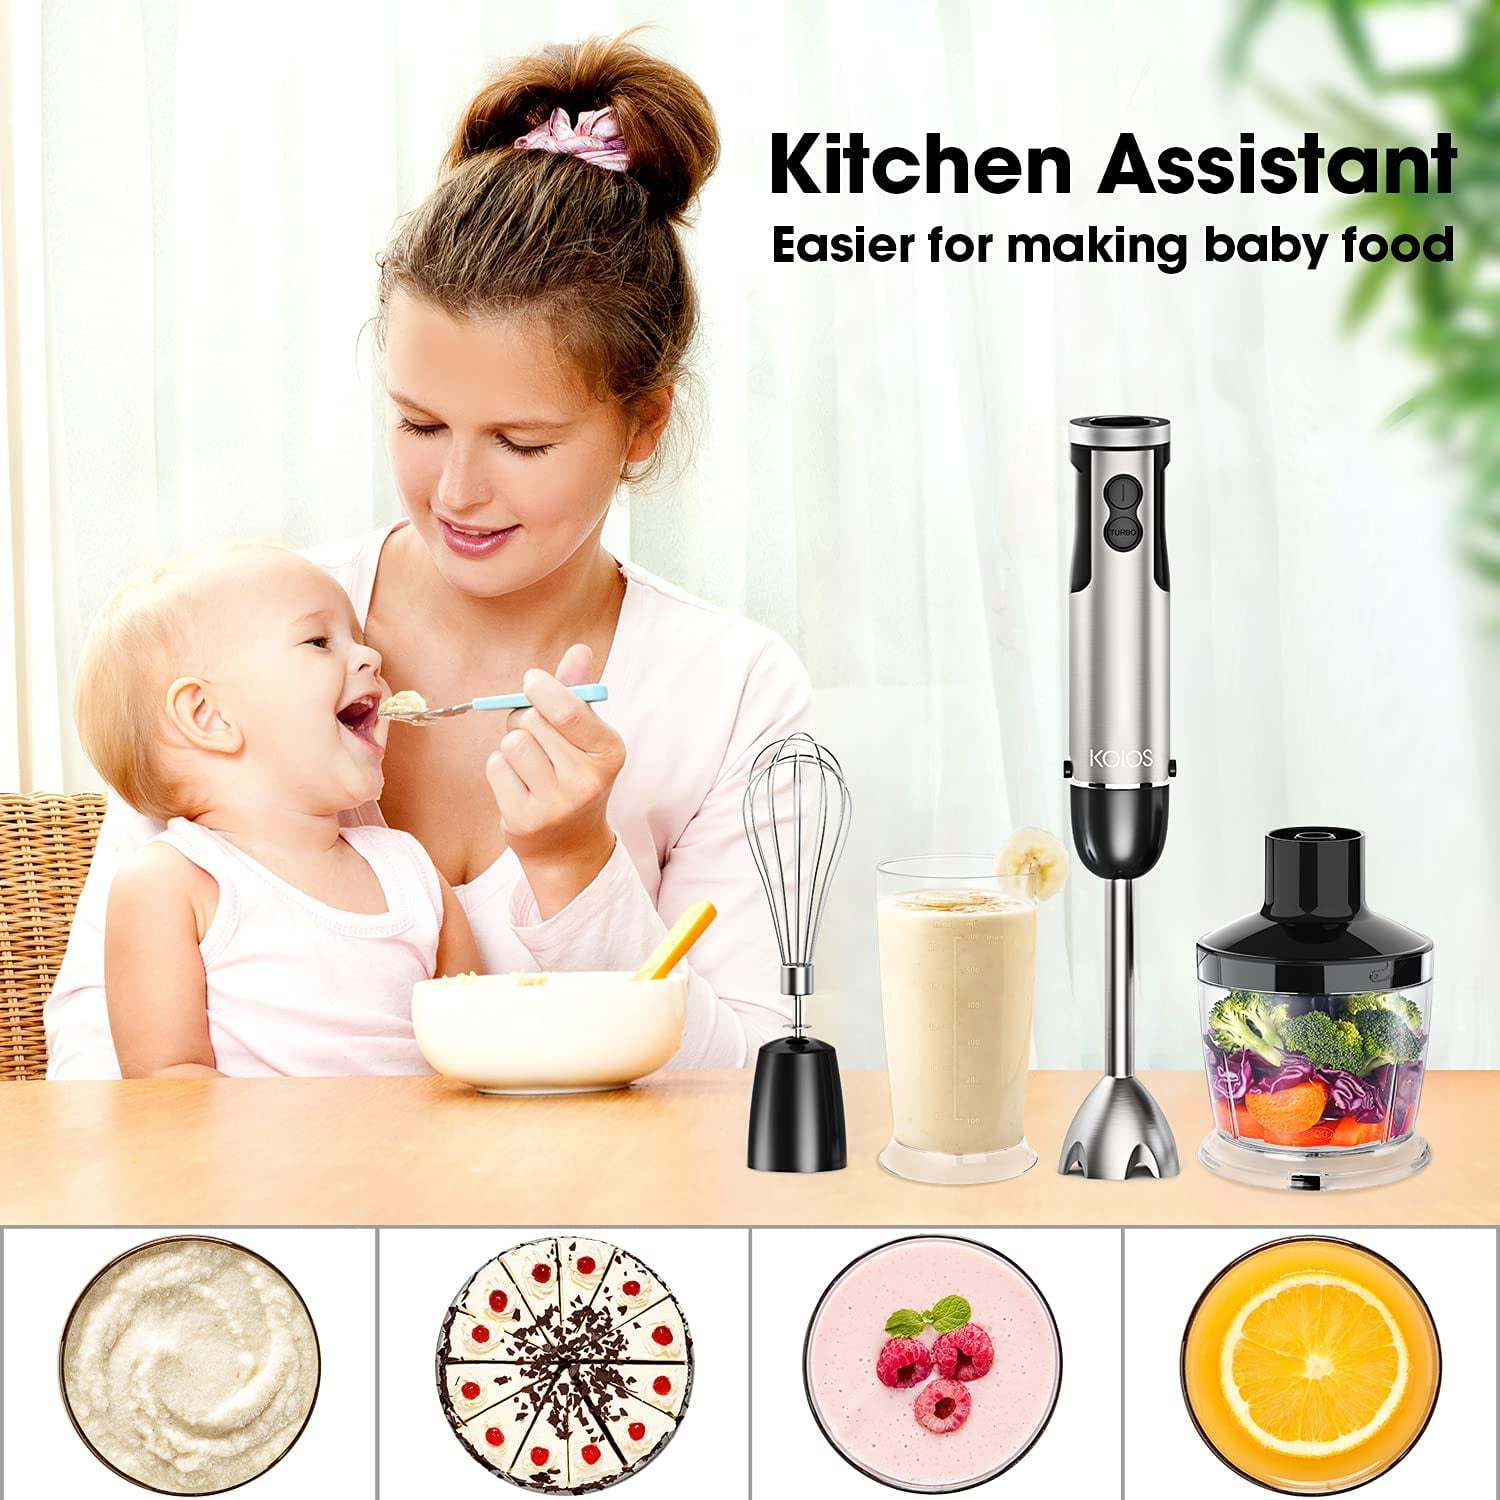 KOIOS HB-2052 1000W 5-in-1 Multifunctional Immersion Hand Blender